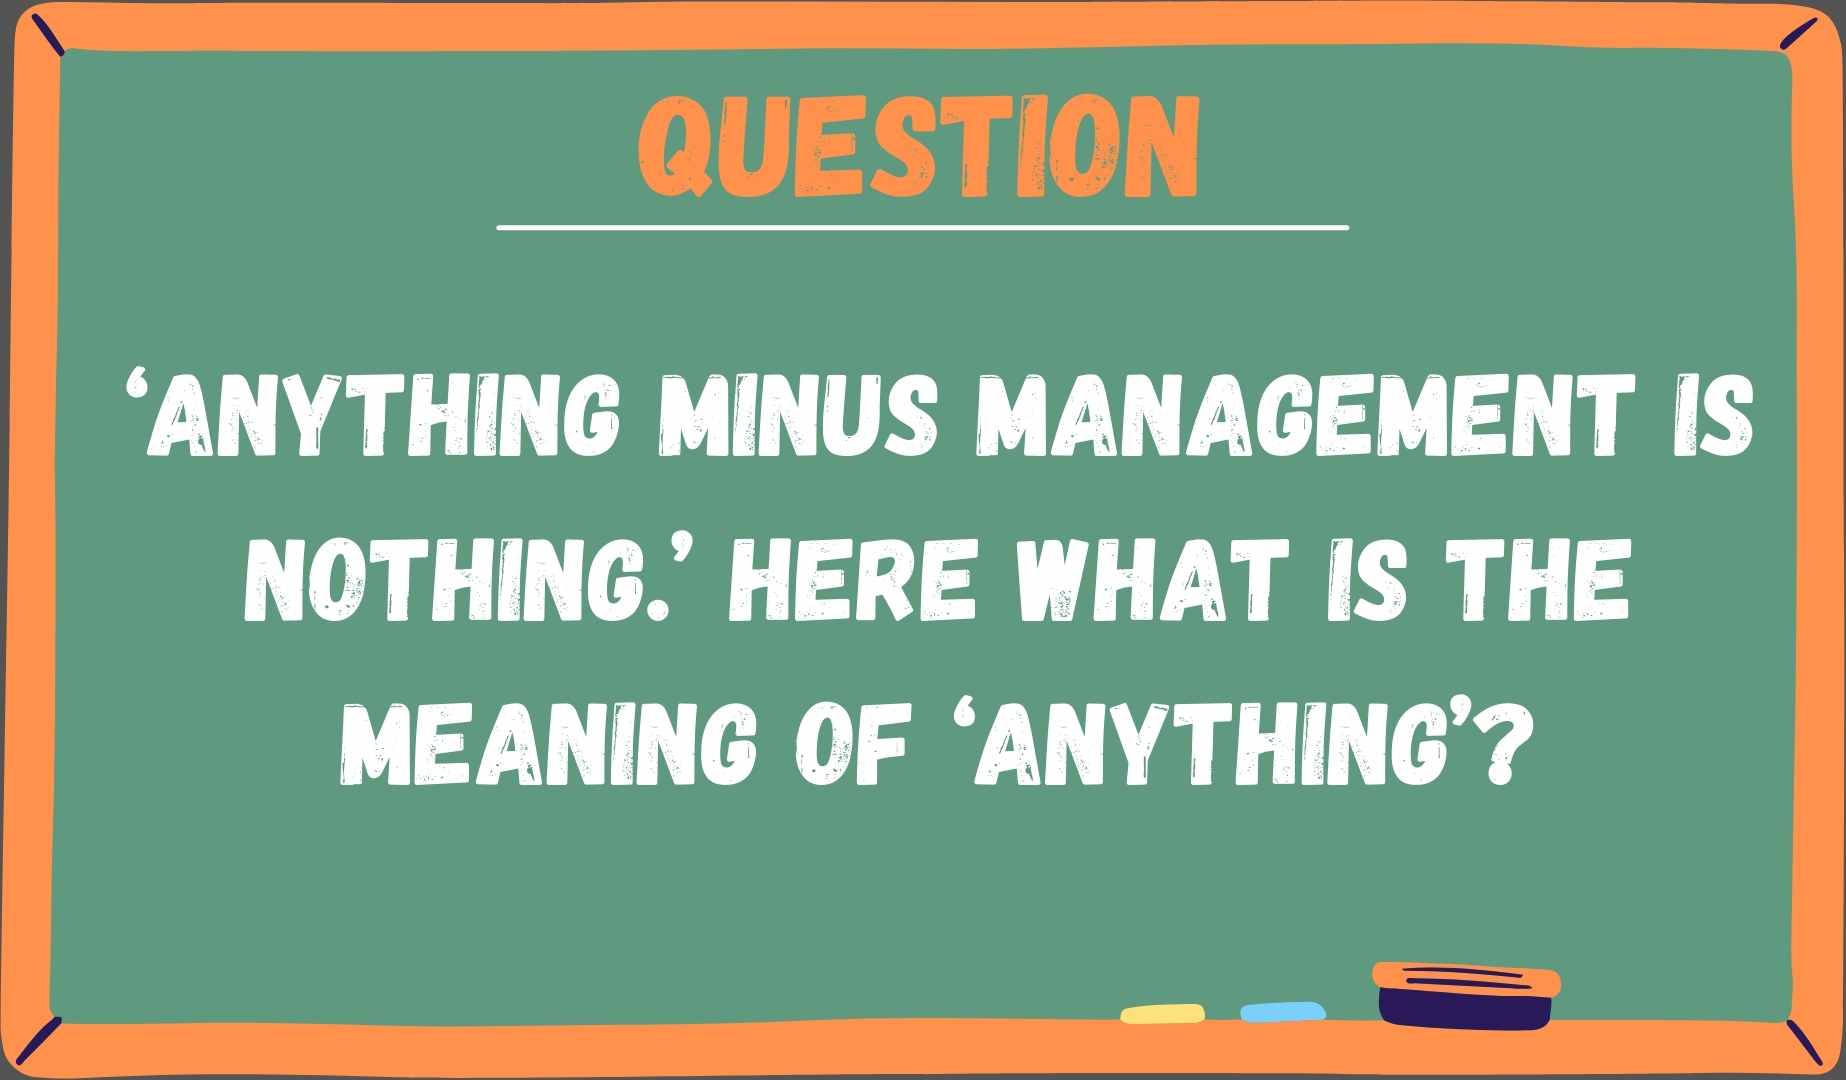 ‘Anything minus management is nothing.’ Here what is the meaning of ‘anything’?